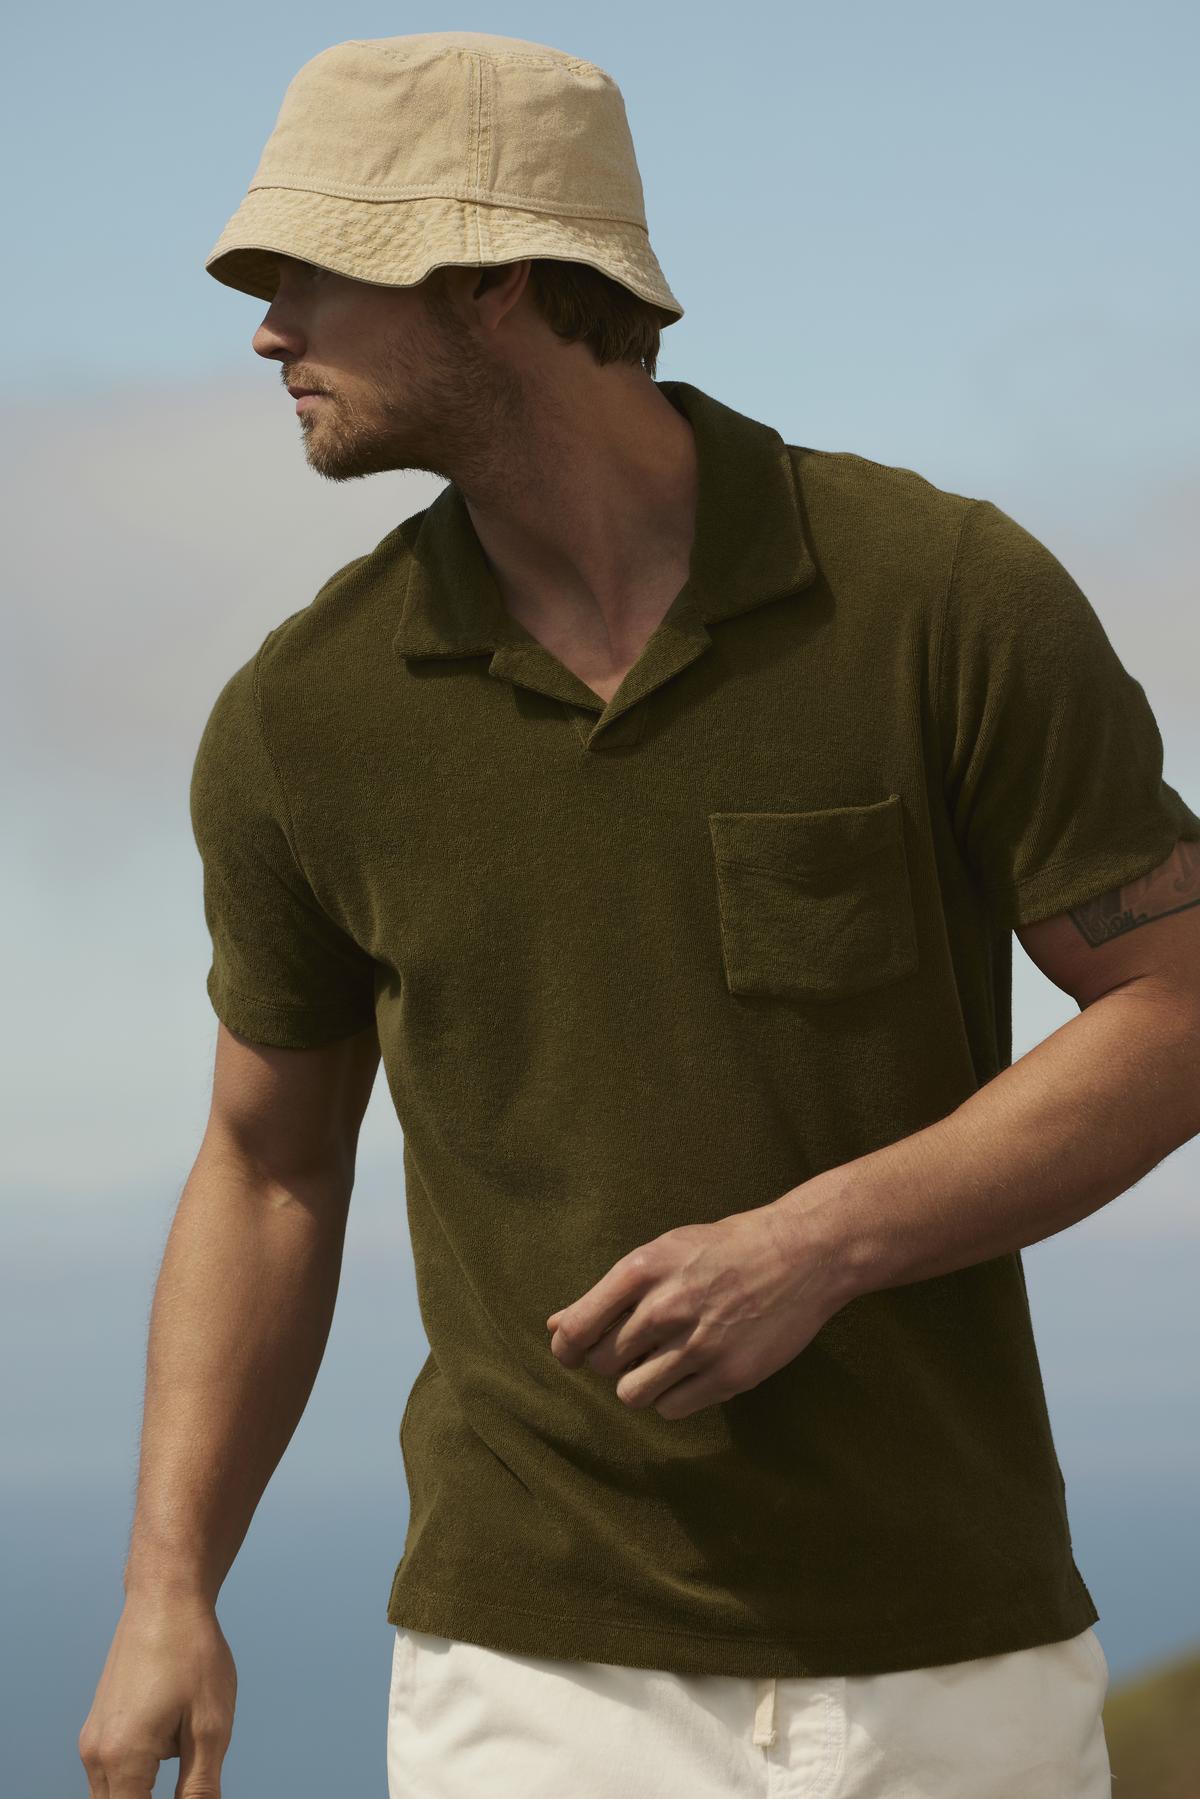   Man in a Velvet by Graham & Spencer Sergey polo shirt and beige hat, looking to the side, standing outdoors with a blurred landscape in the background. 